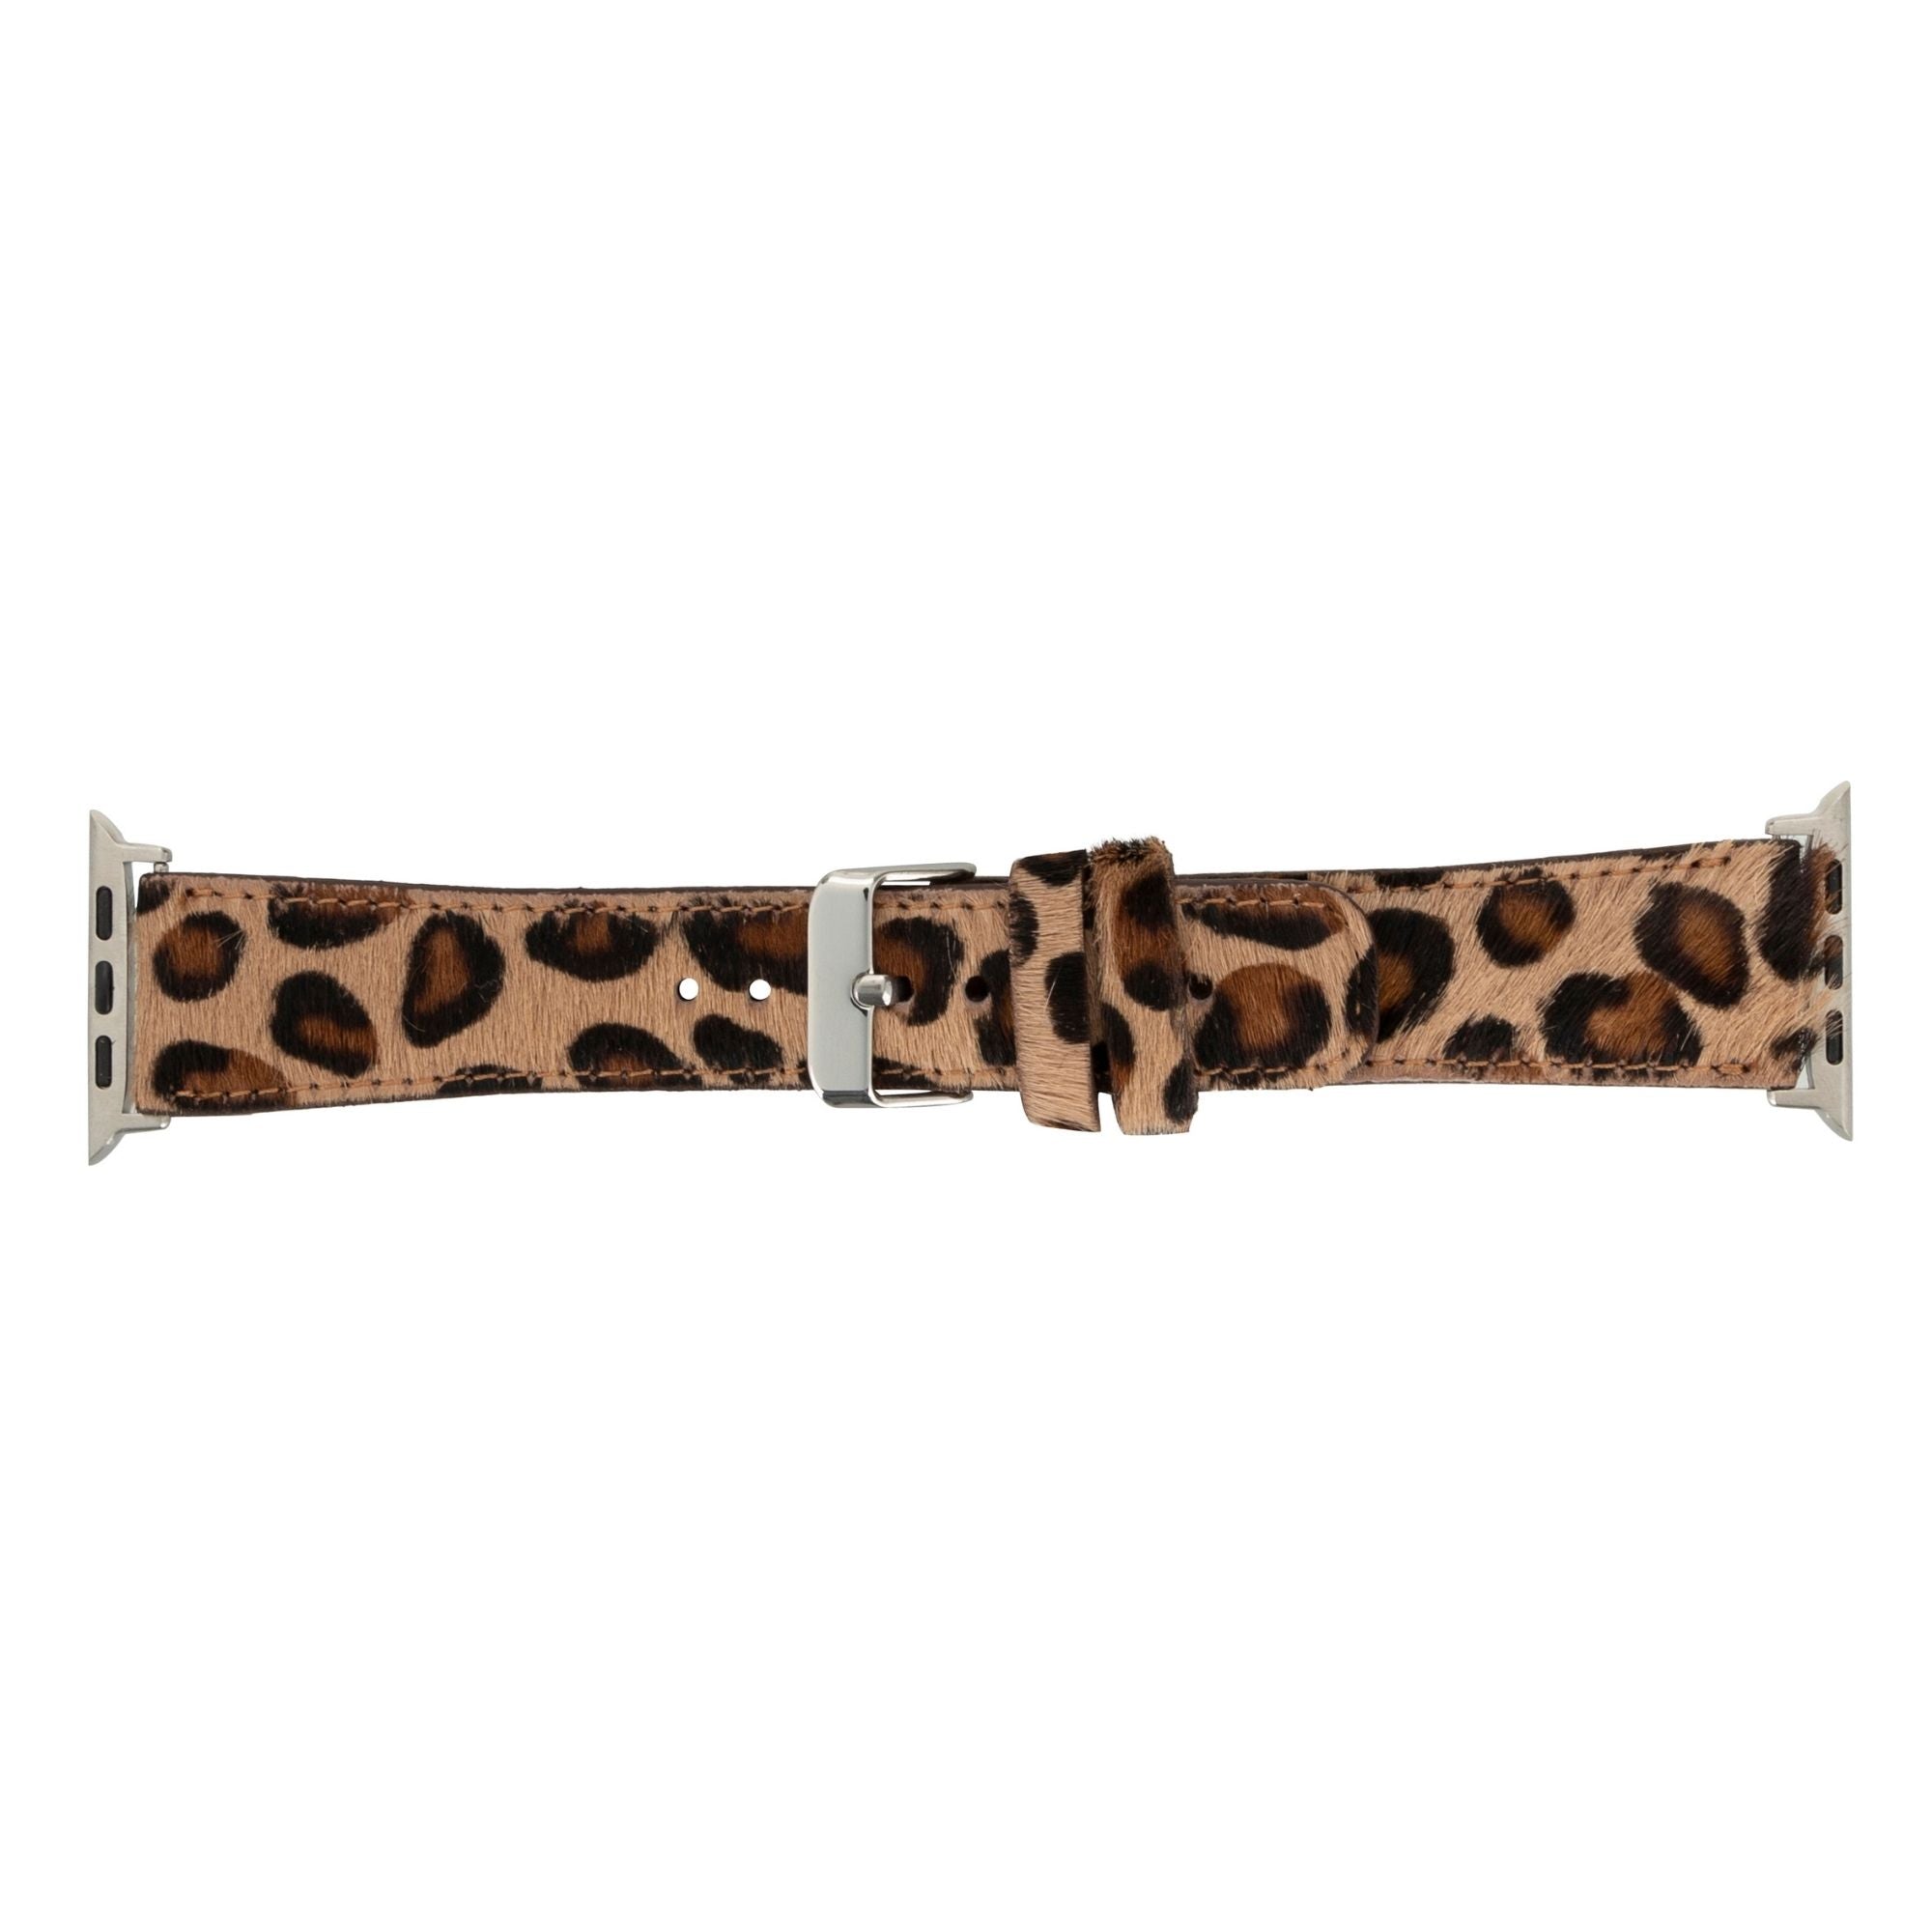 Thick Leather Apple Watch Band / Leopard or Cheetah Print / 